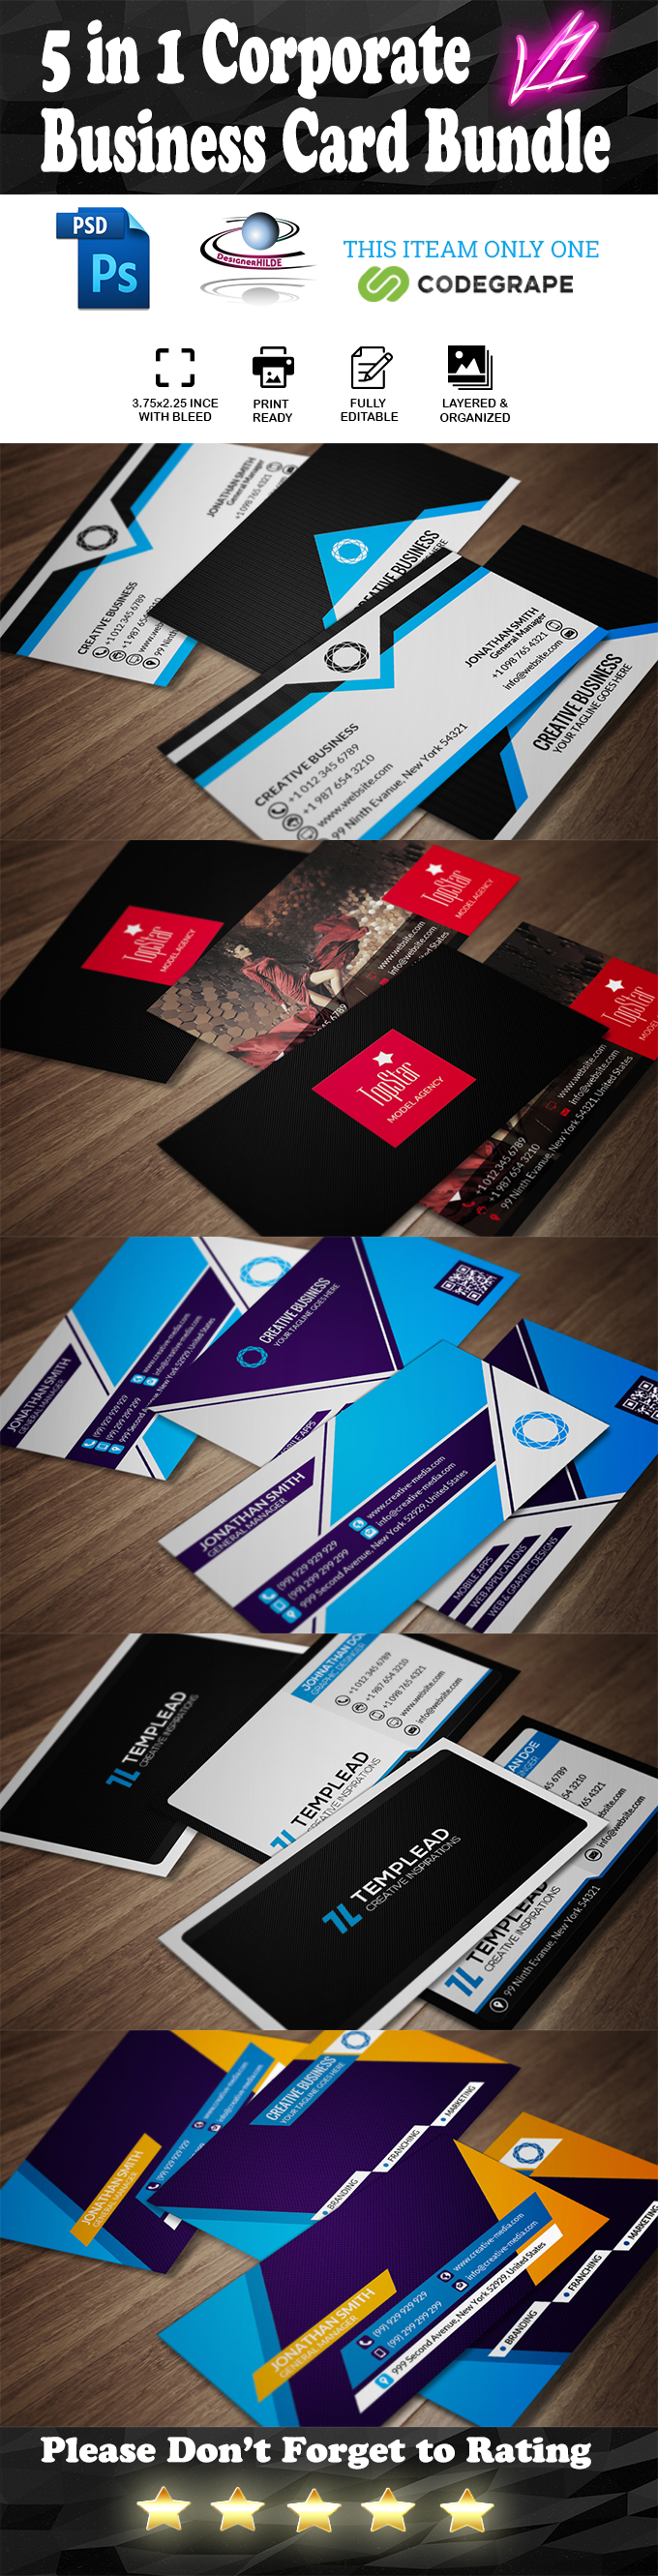 5 in 1 Corporate Business Card Bundle v 1